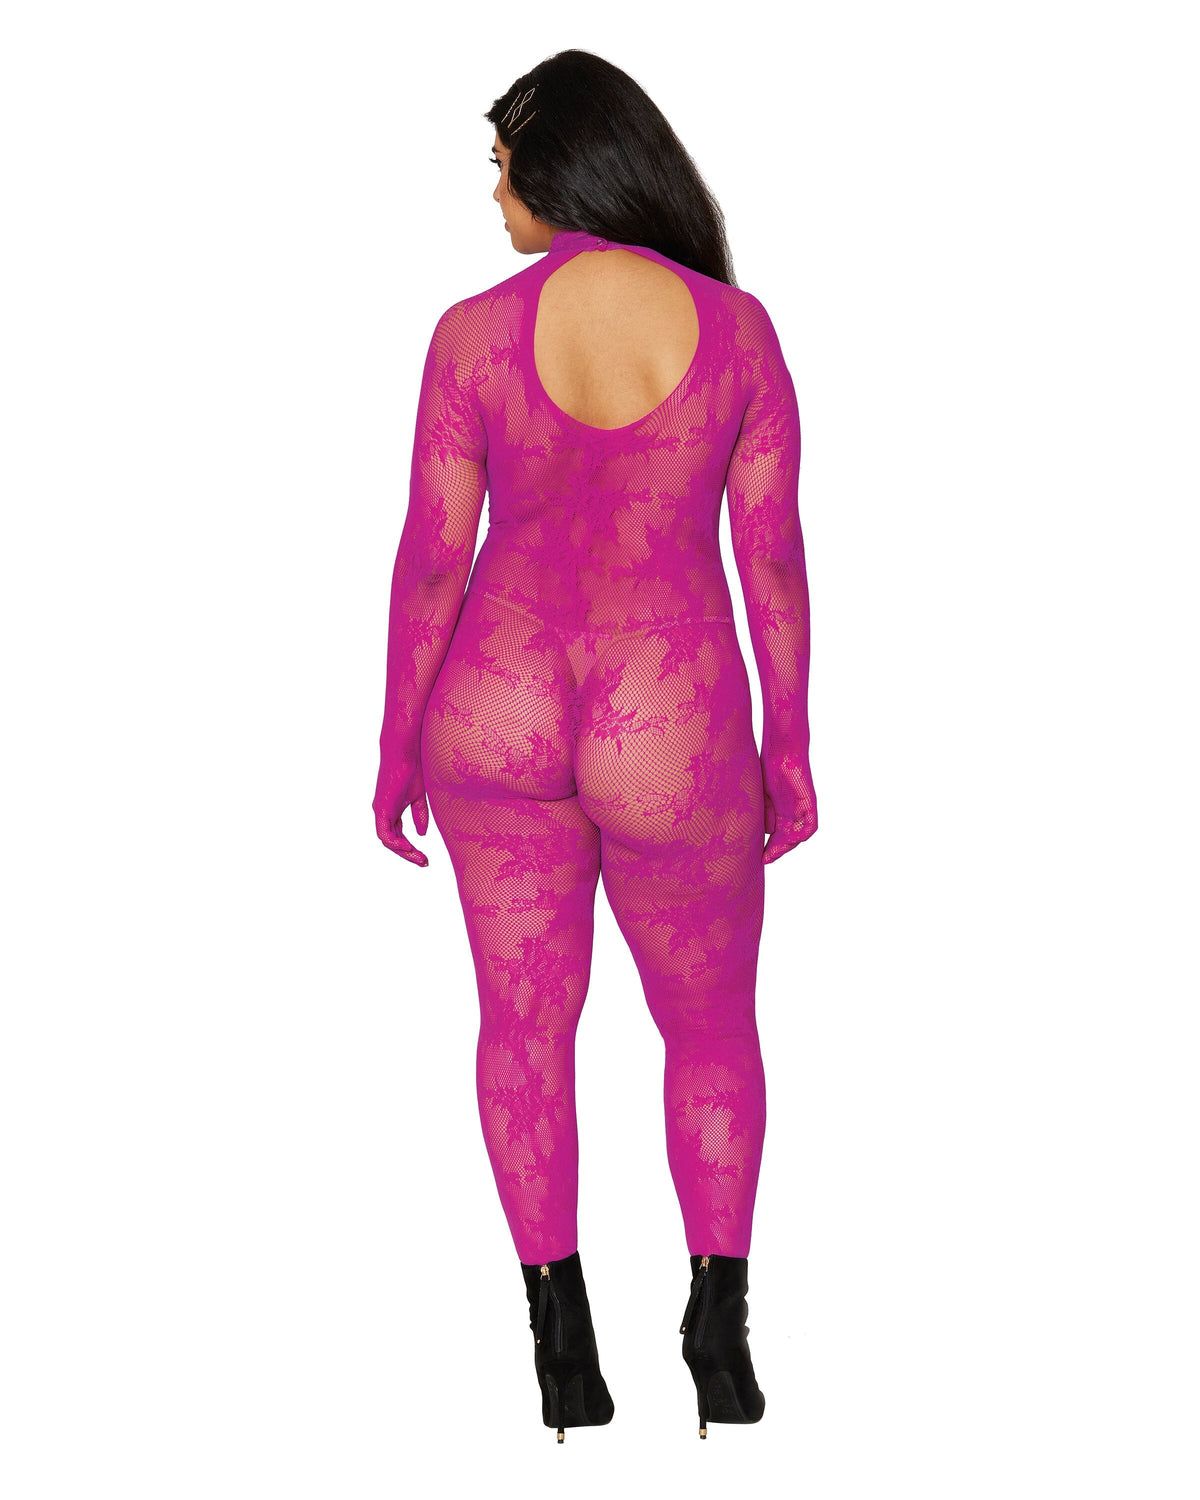 Seamless floral knitted fishnet catsuit bodystocking Lingerie Dreamgirl International 